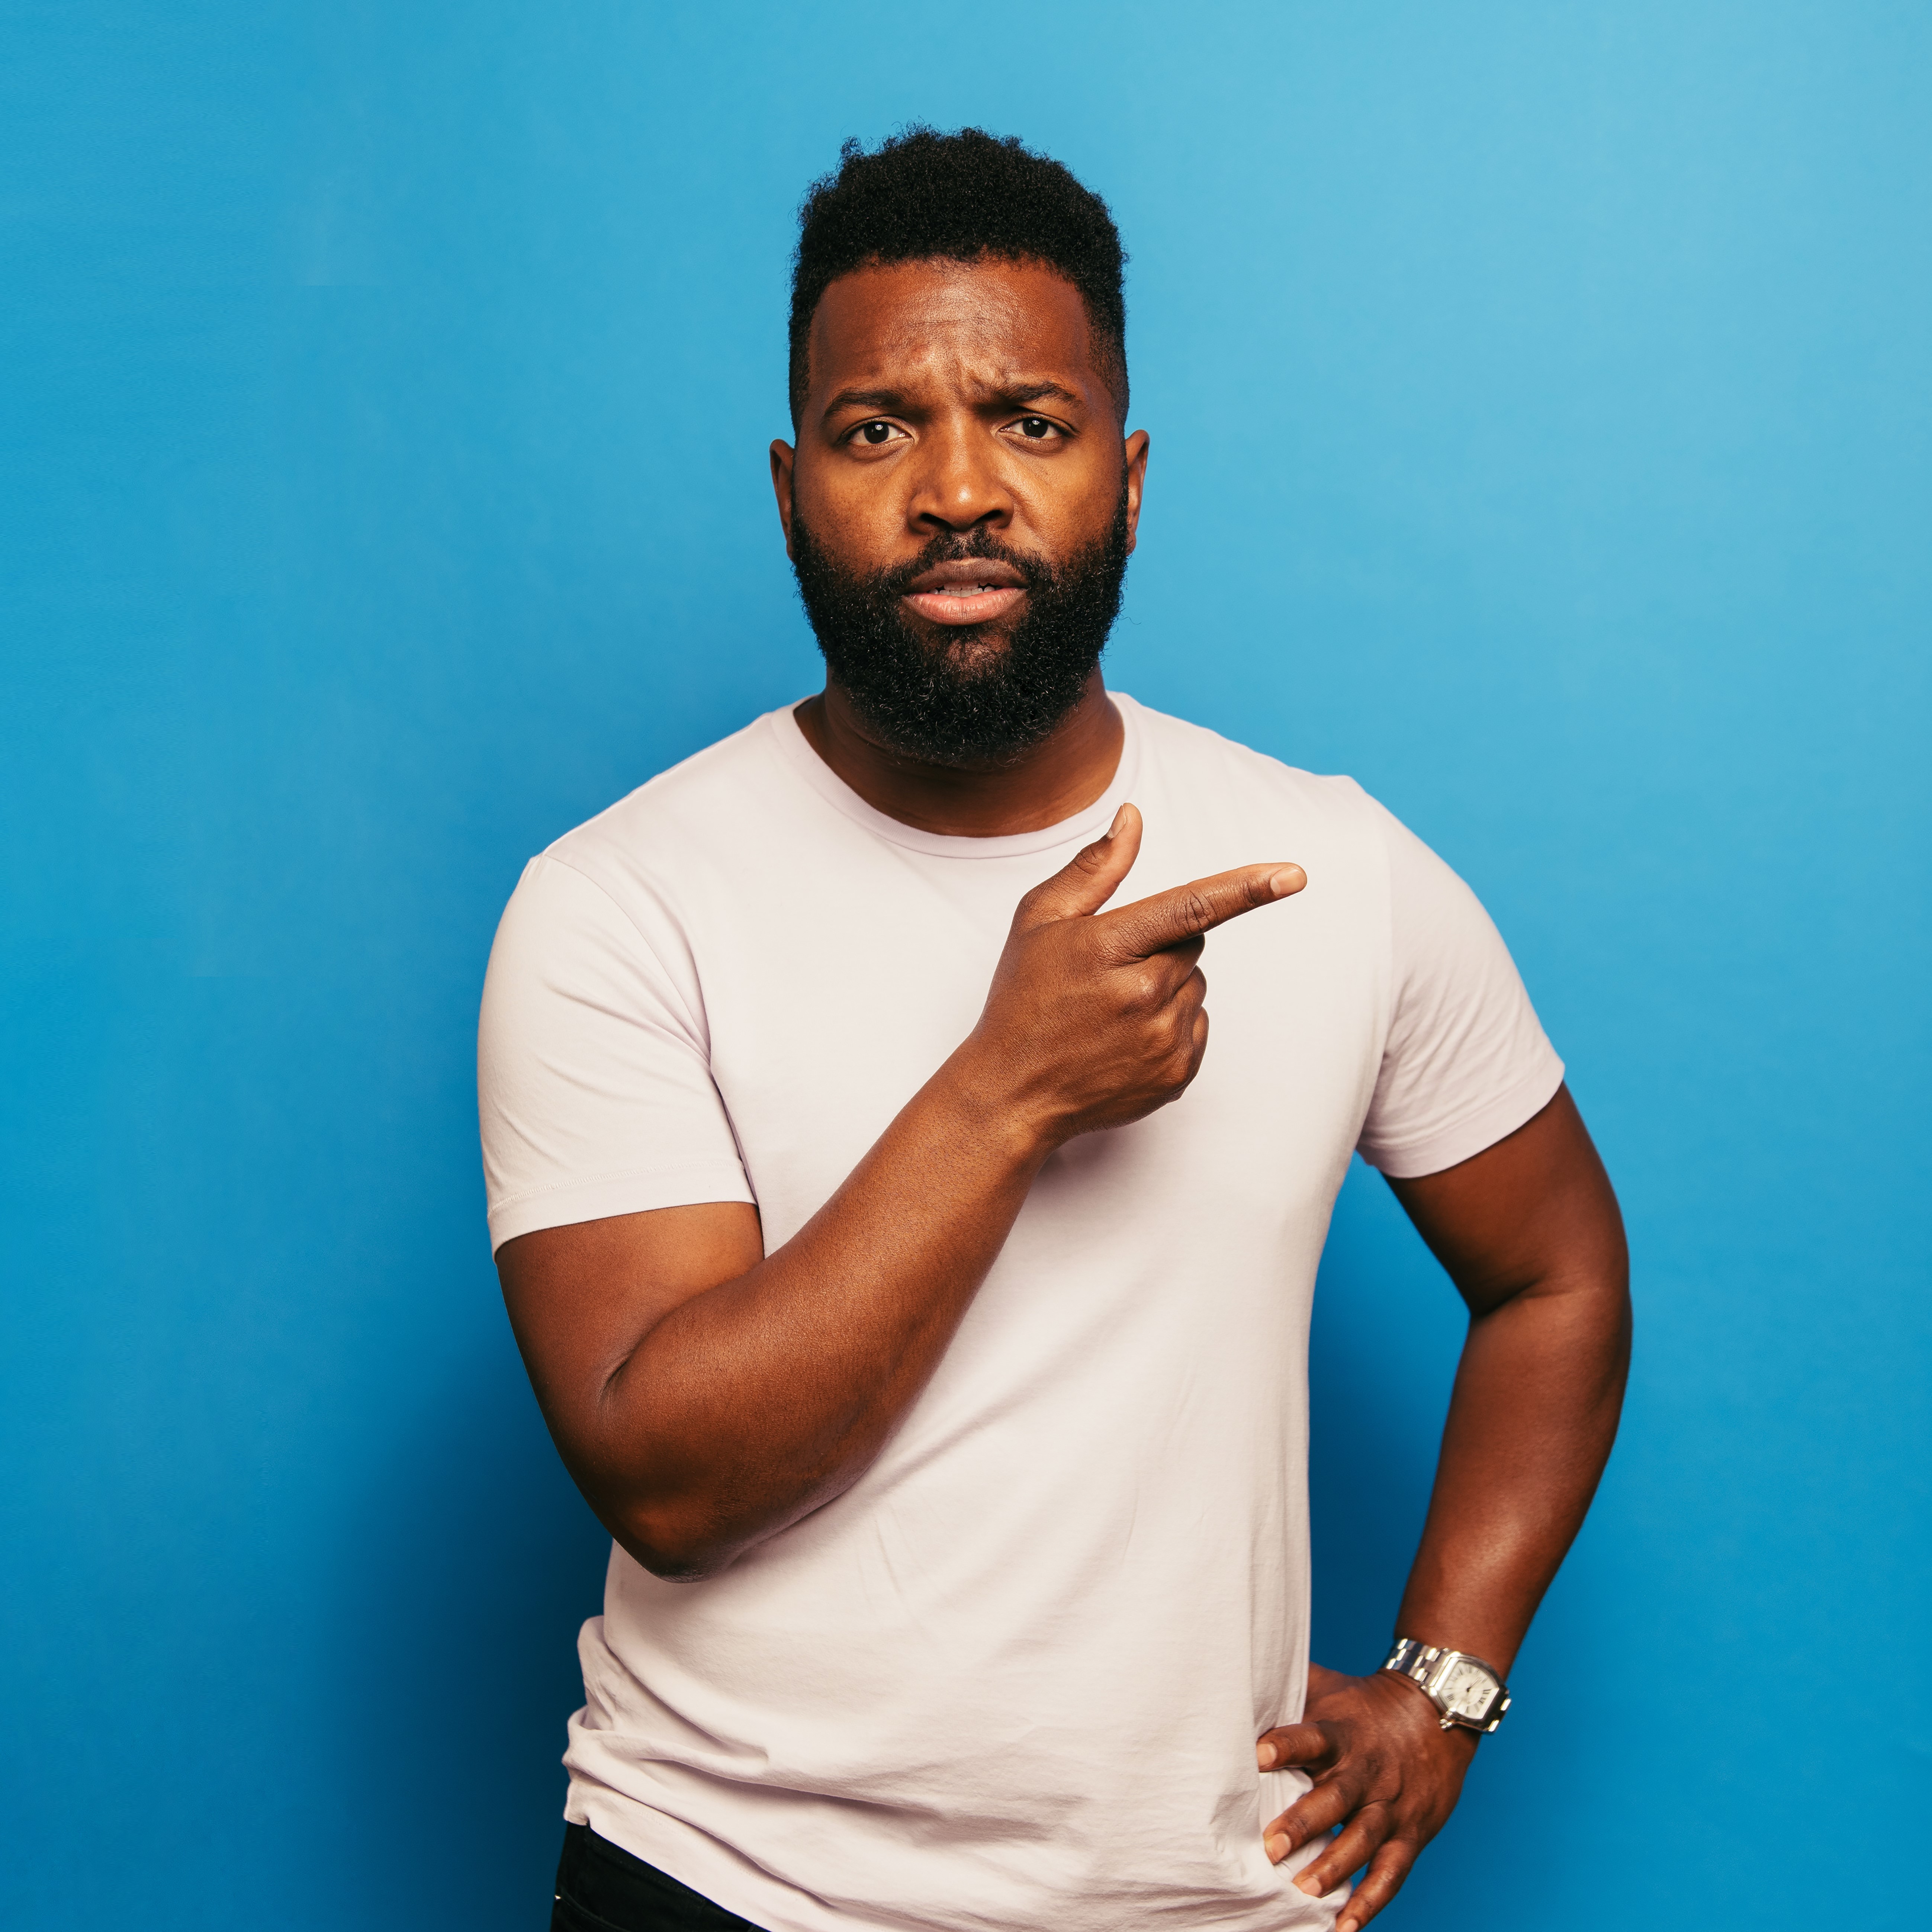 Baratunde Thurston, <span>Executive Producer & Host of How To Citizen with Baratunde podcast</span>